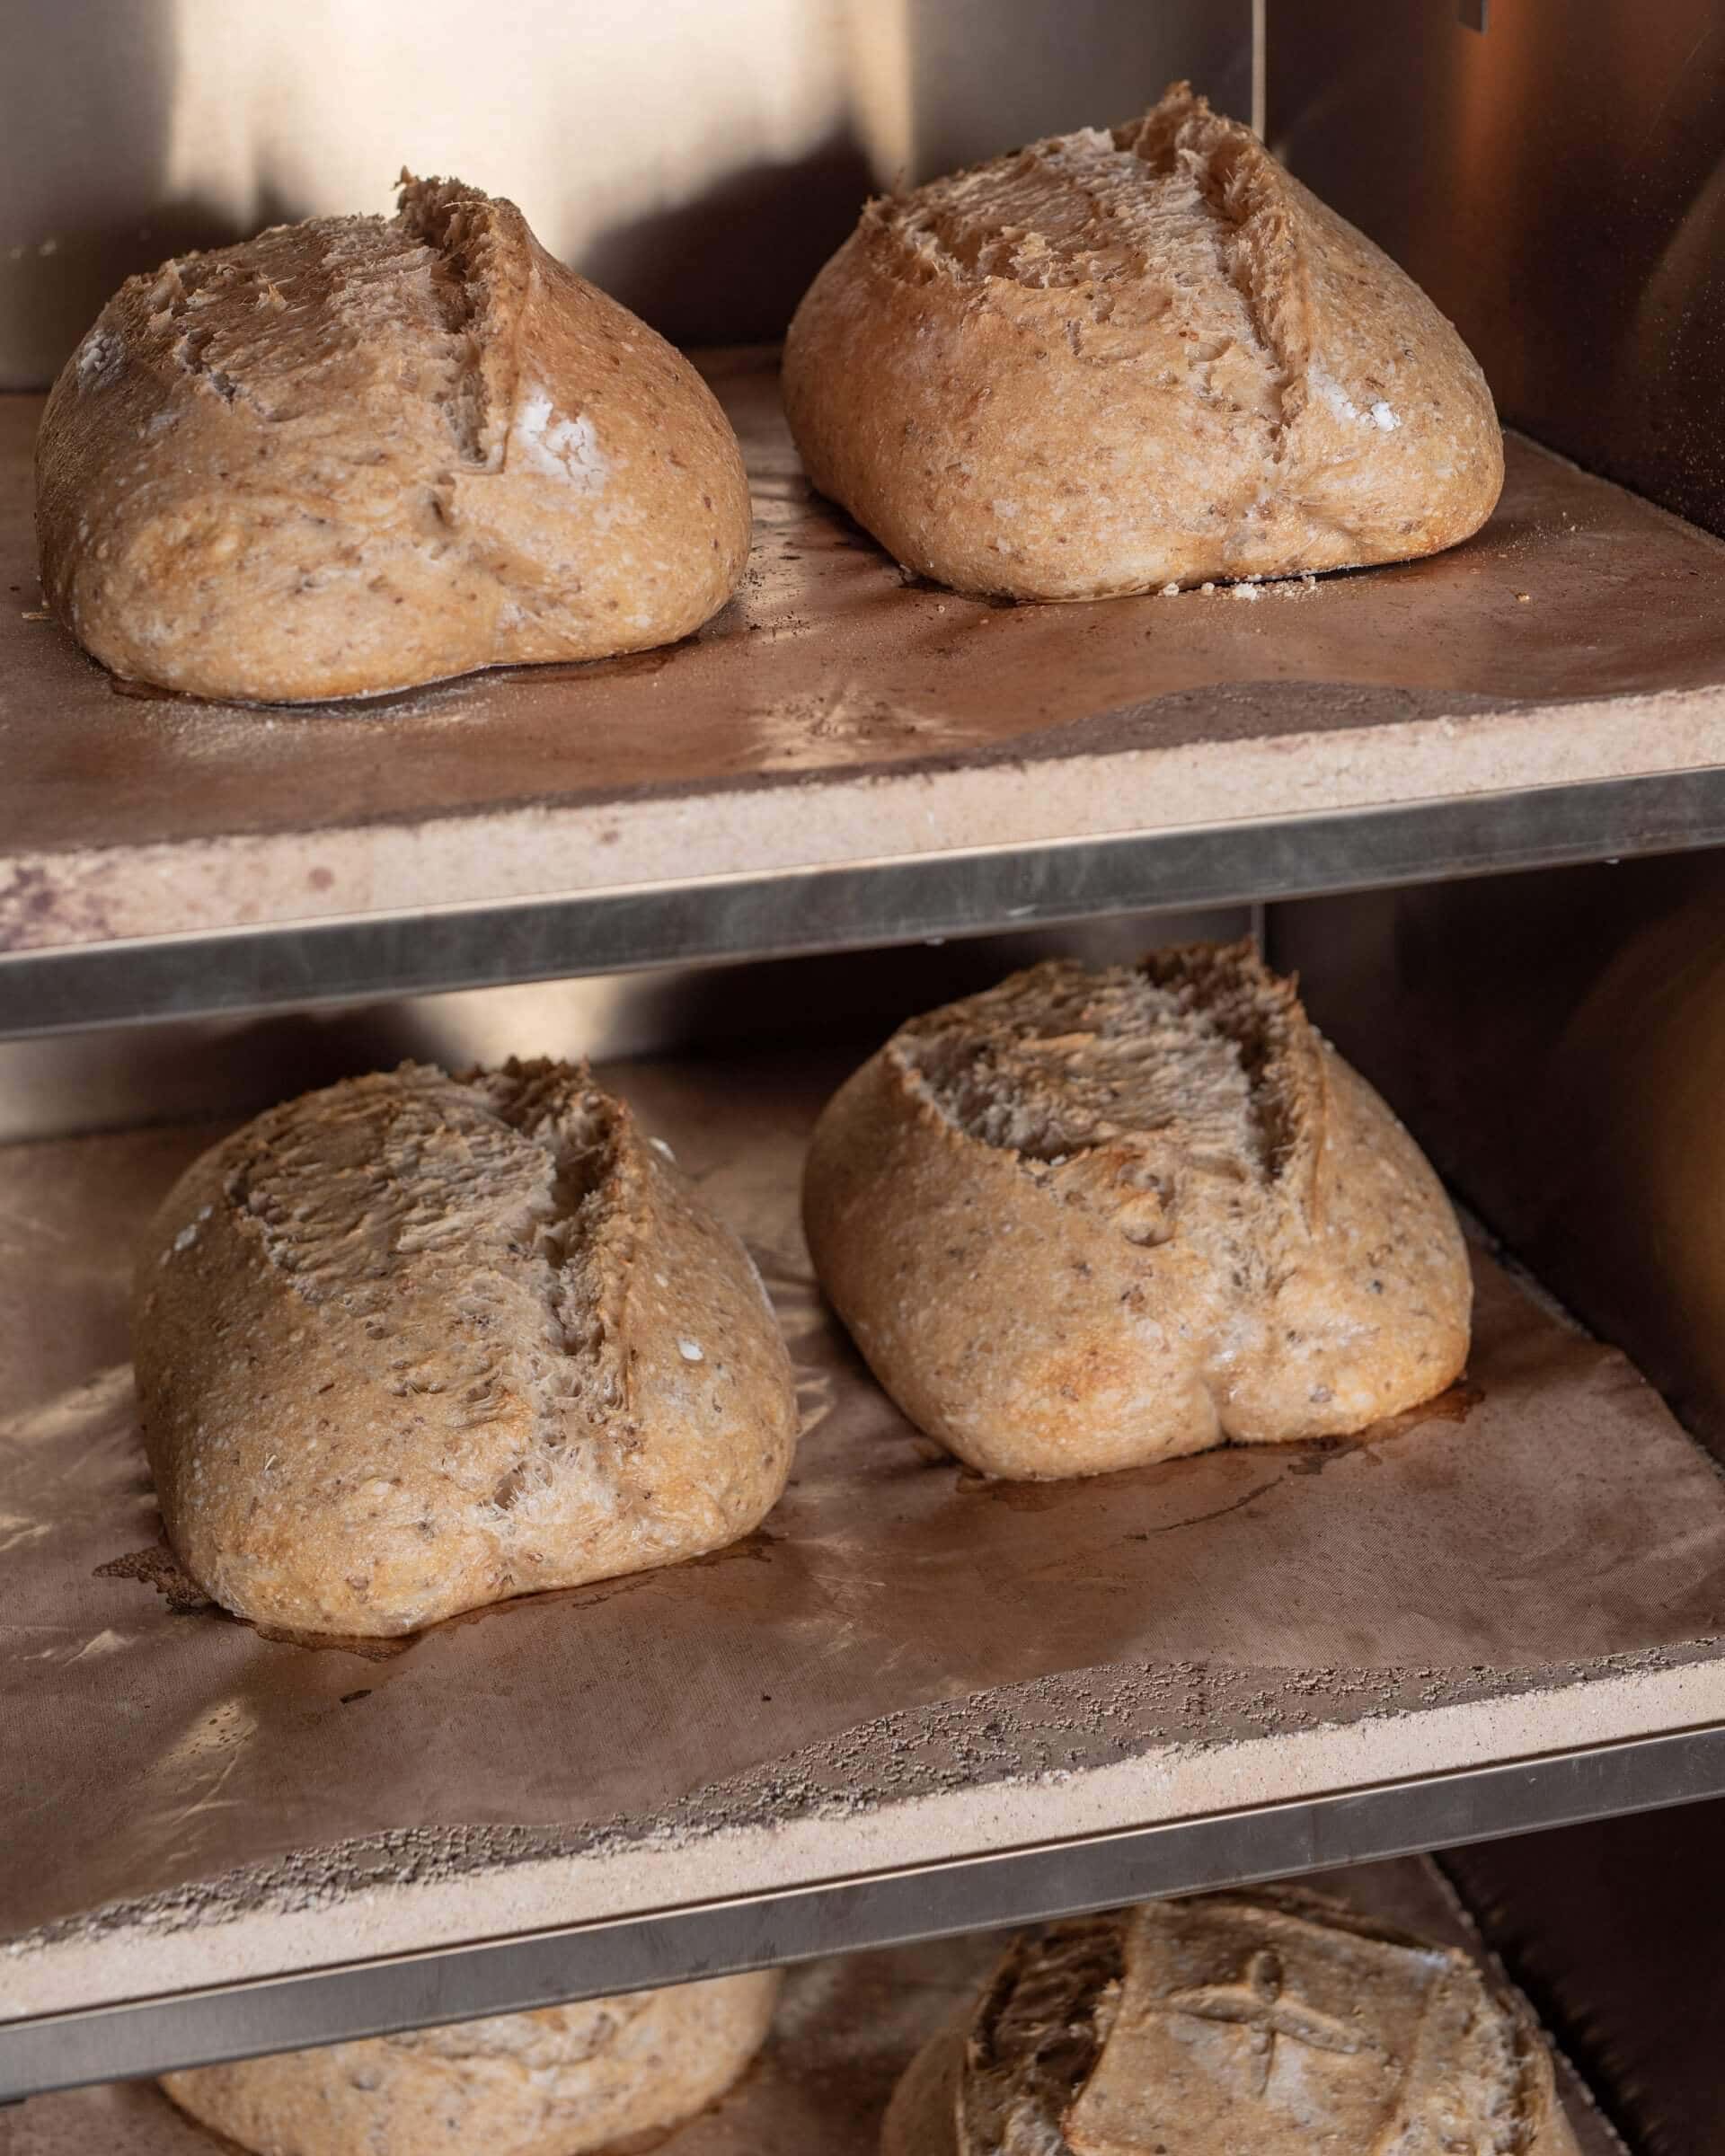 https://www.theperfectloaf.com/wp-content/uploads/2019/10/theperfectloaf-rofco-b40-bread-oven-vertical-1-1920x2400.jpg